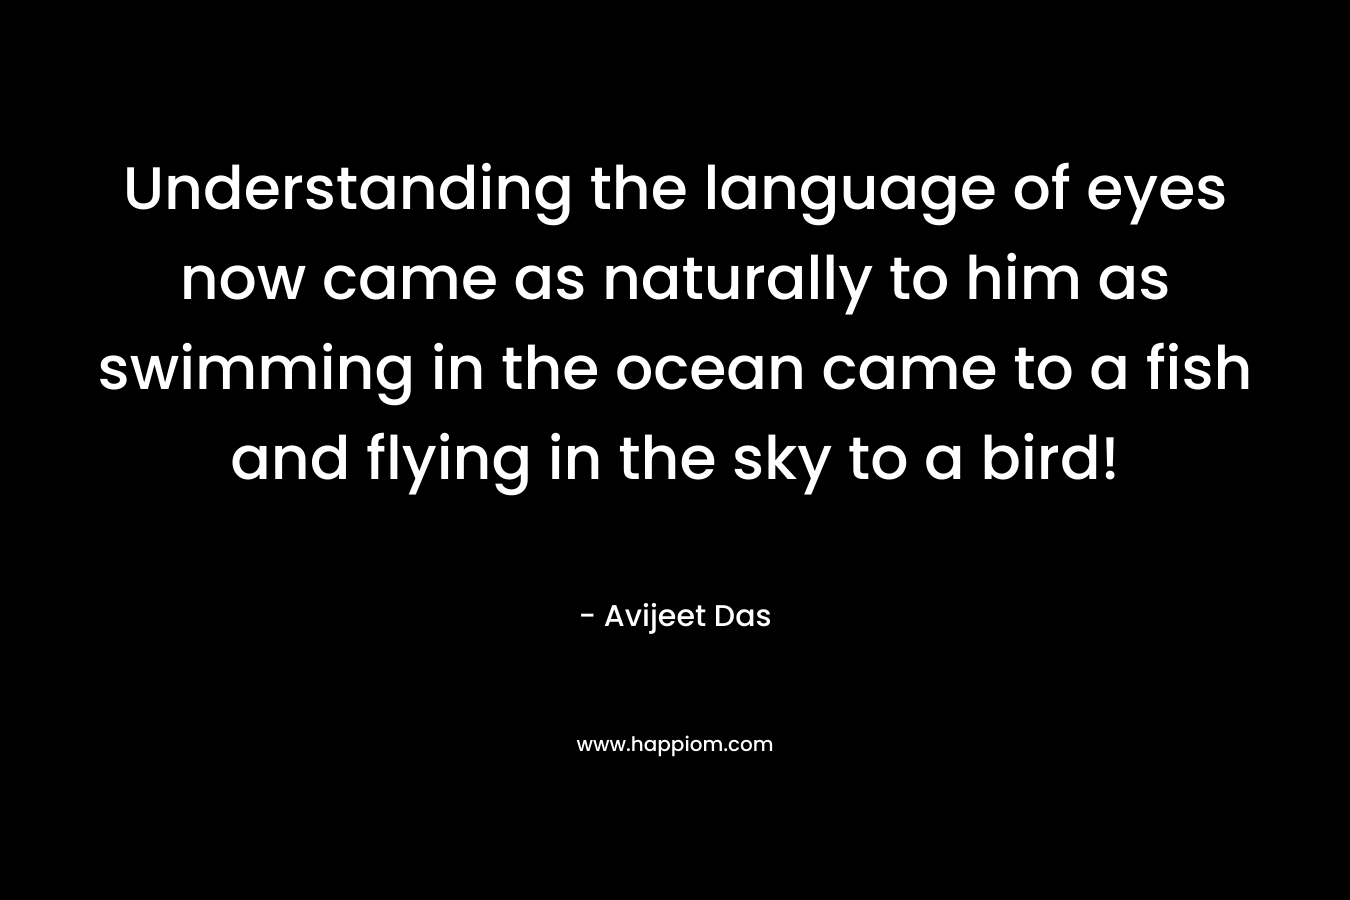 Understanding the language of eyes now came as naturally to him as swimming in the ocean came to a fish and flying in the sky to a bird! – Avijeet Das